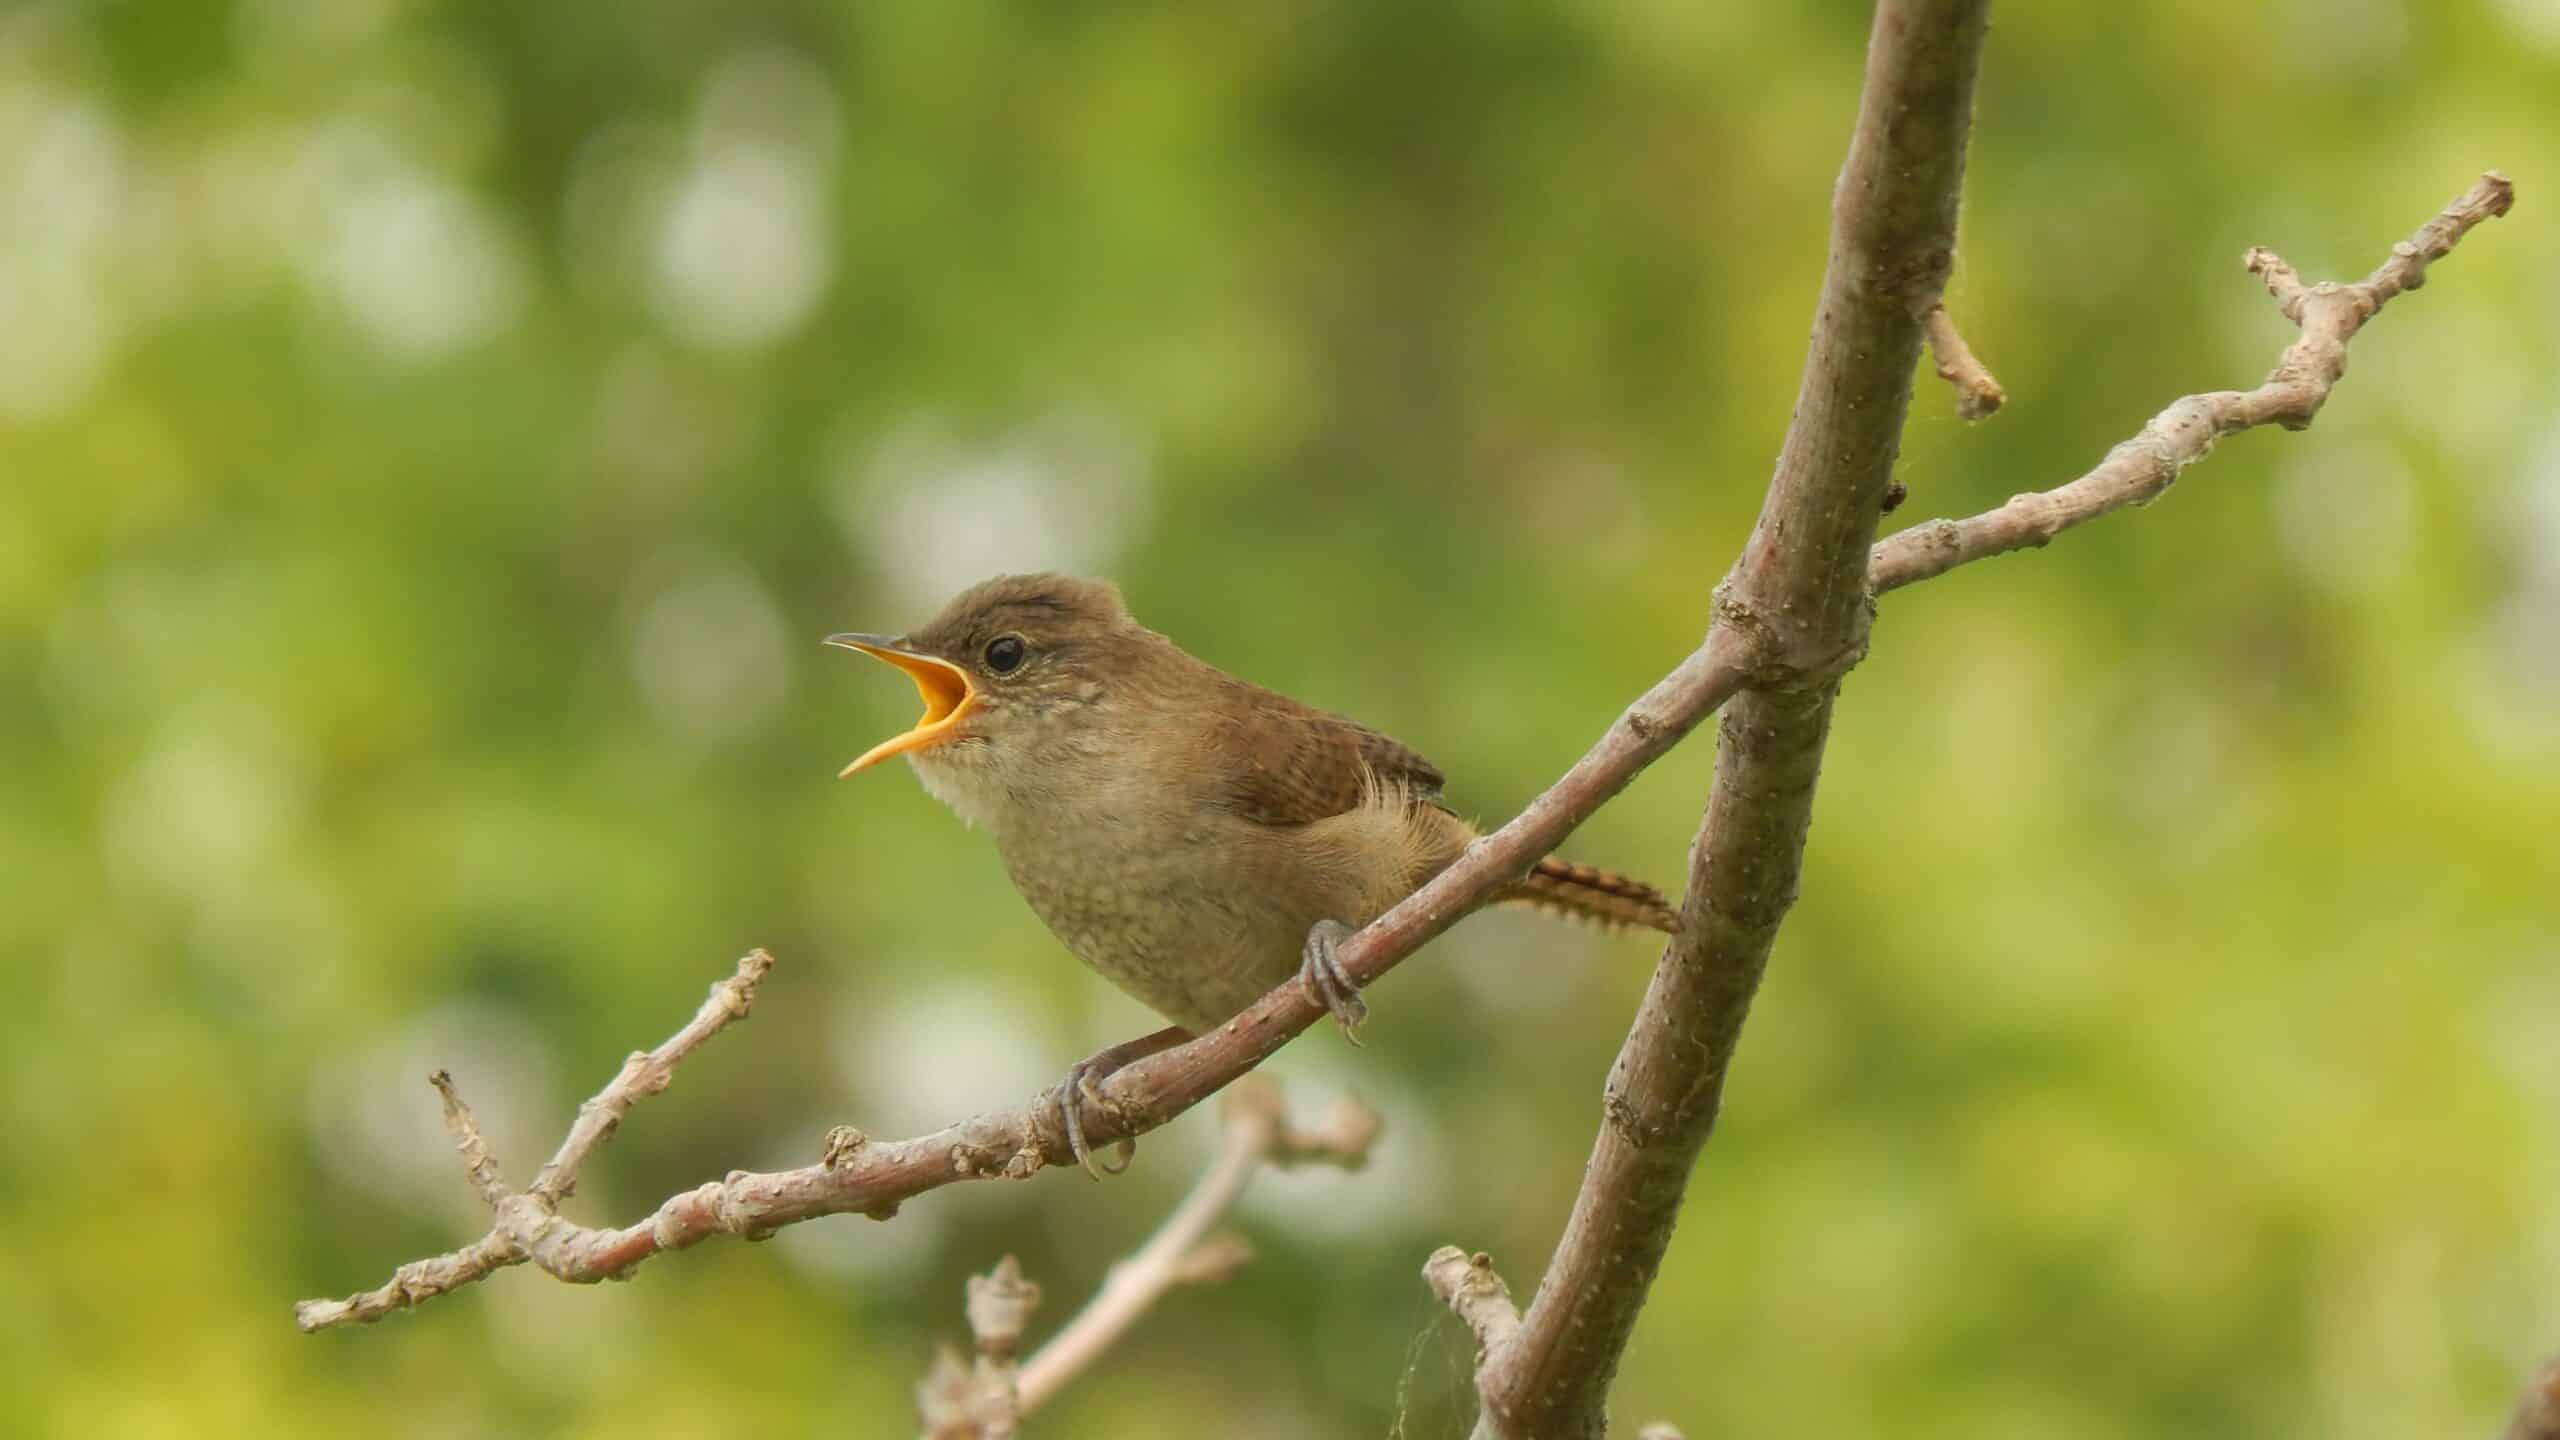 House wren - For Two Backyard Bird Species, More Light Pollution Is Linked to Lower Survival - College of Natural Resources at NC State University